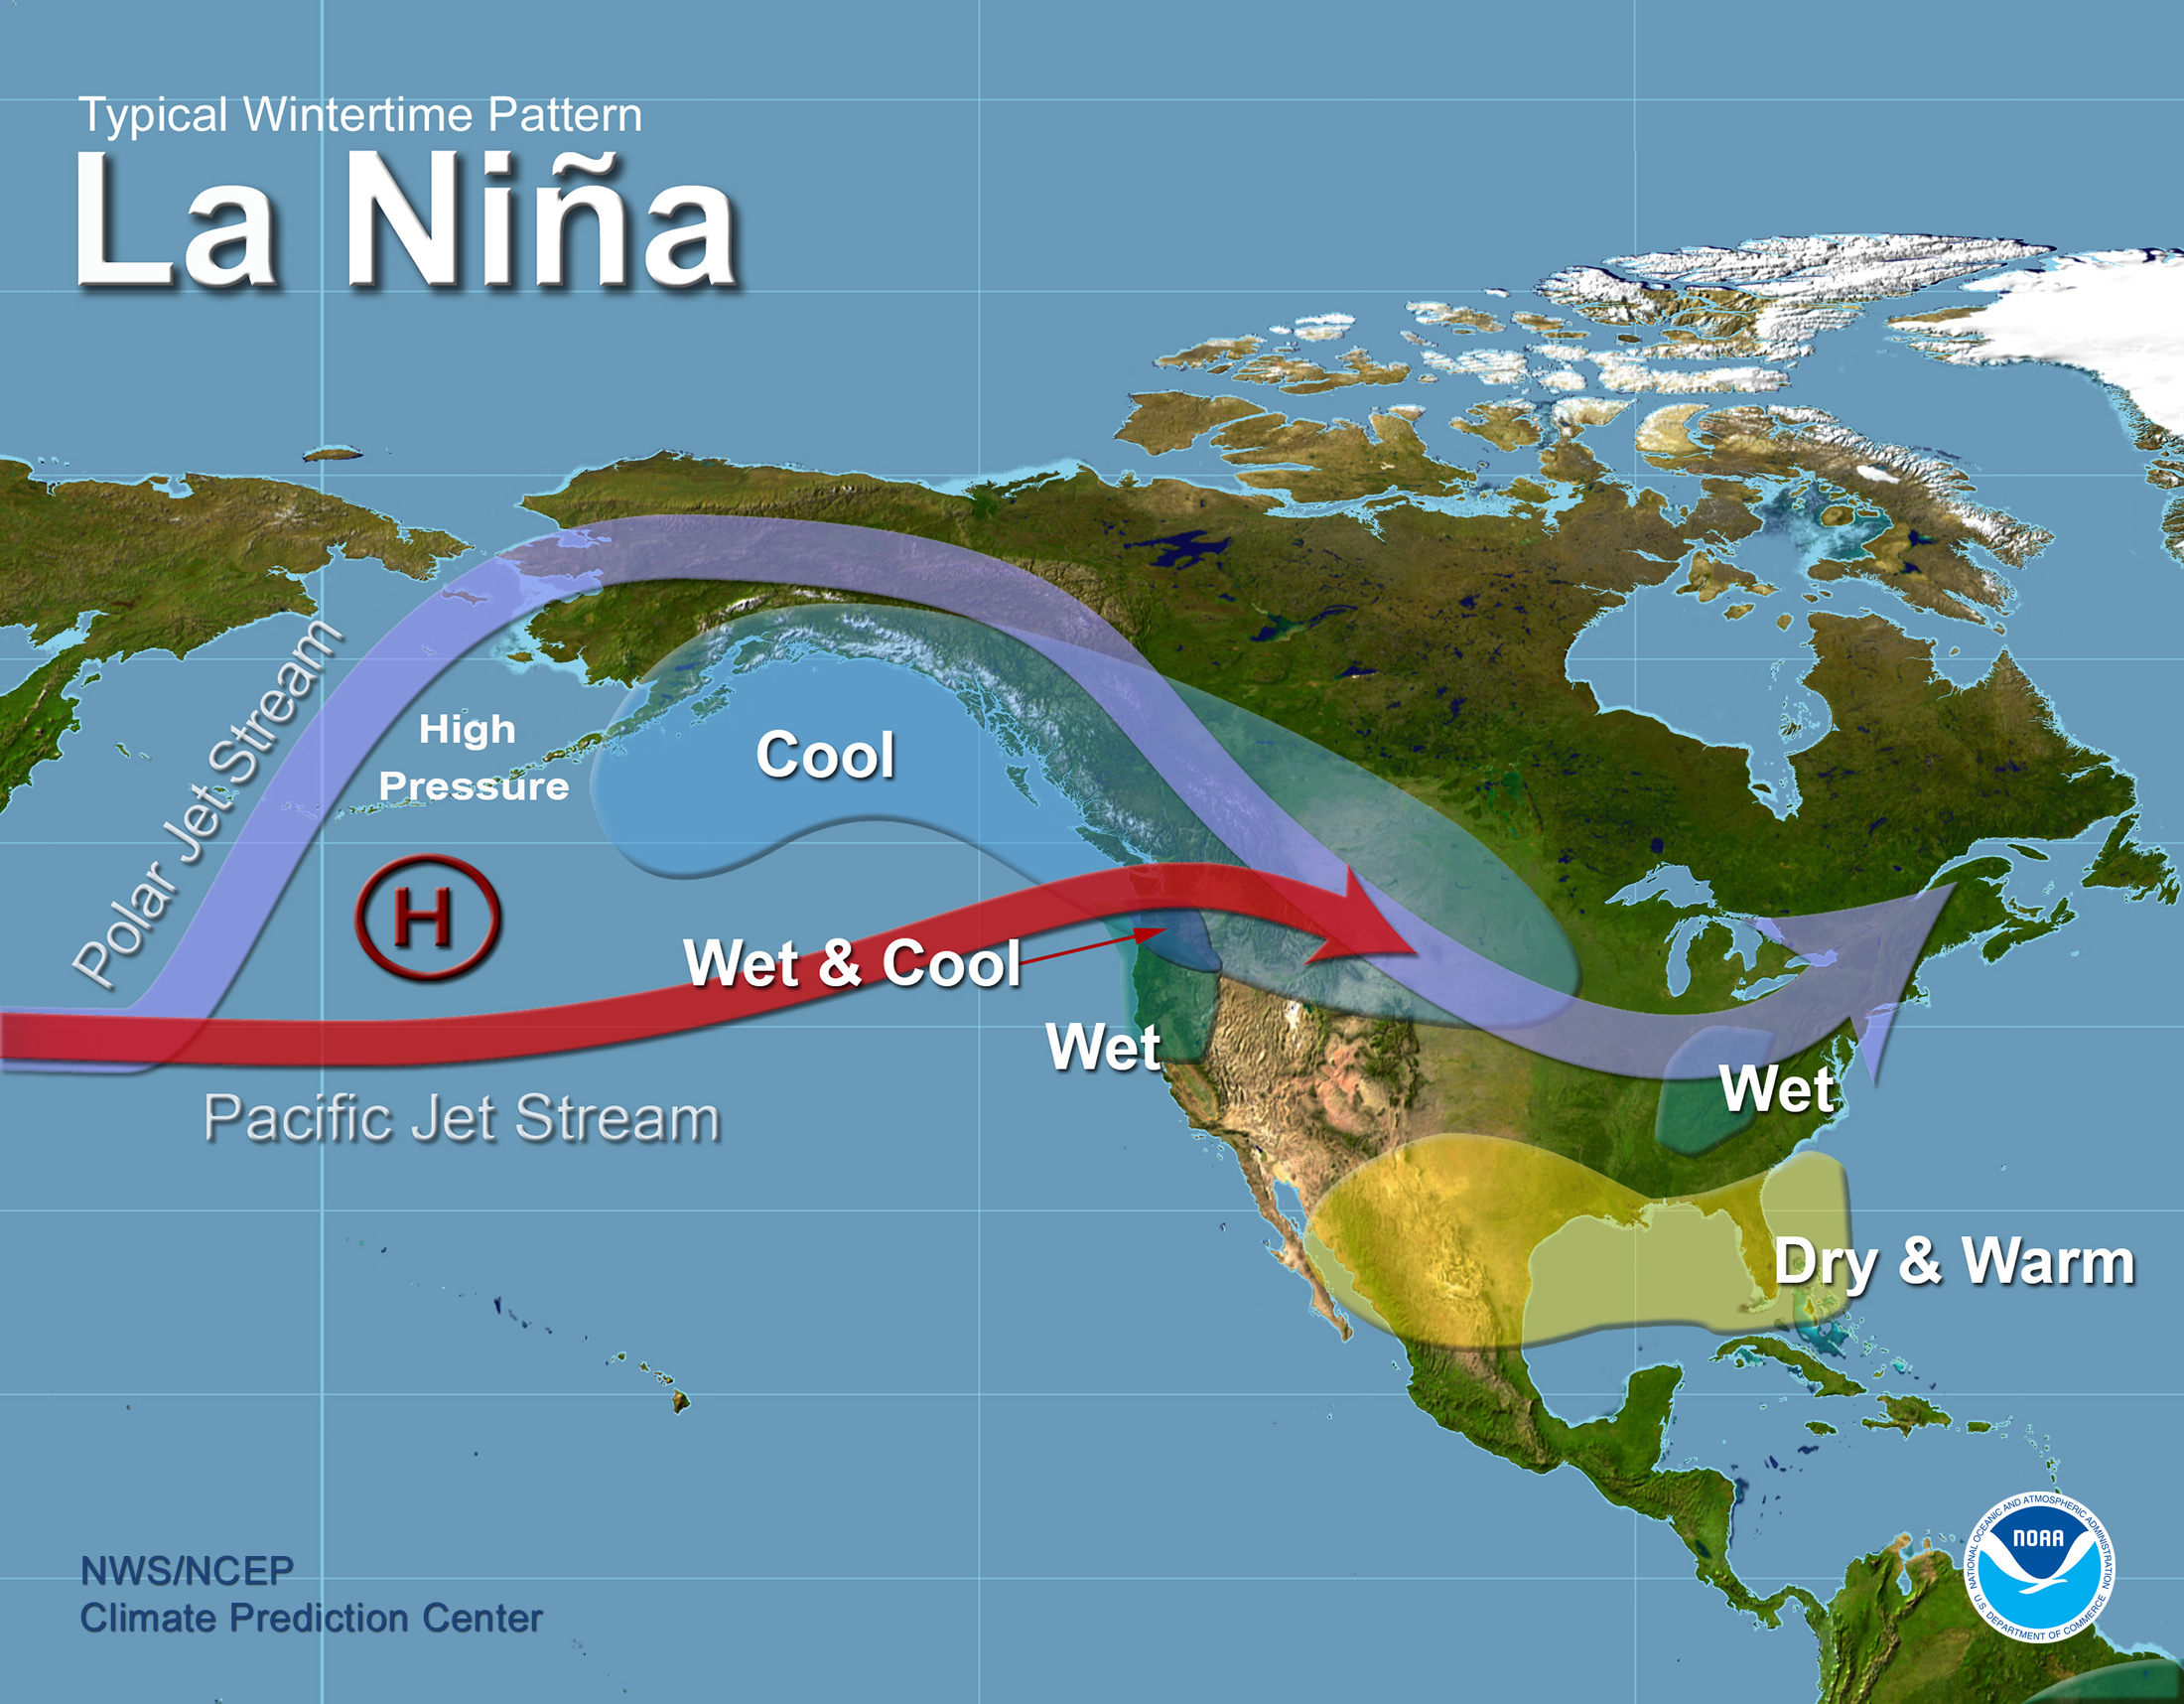 Typical La Nina winter weather pattern for North America. image: noaa